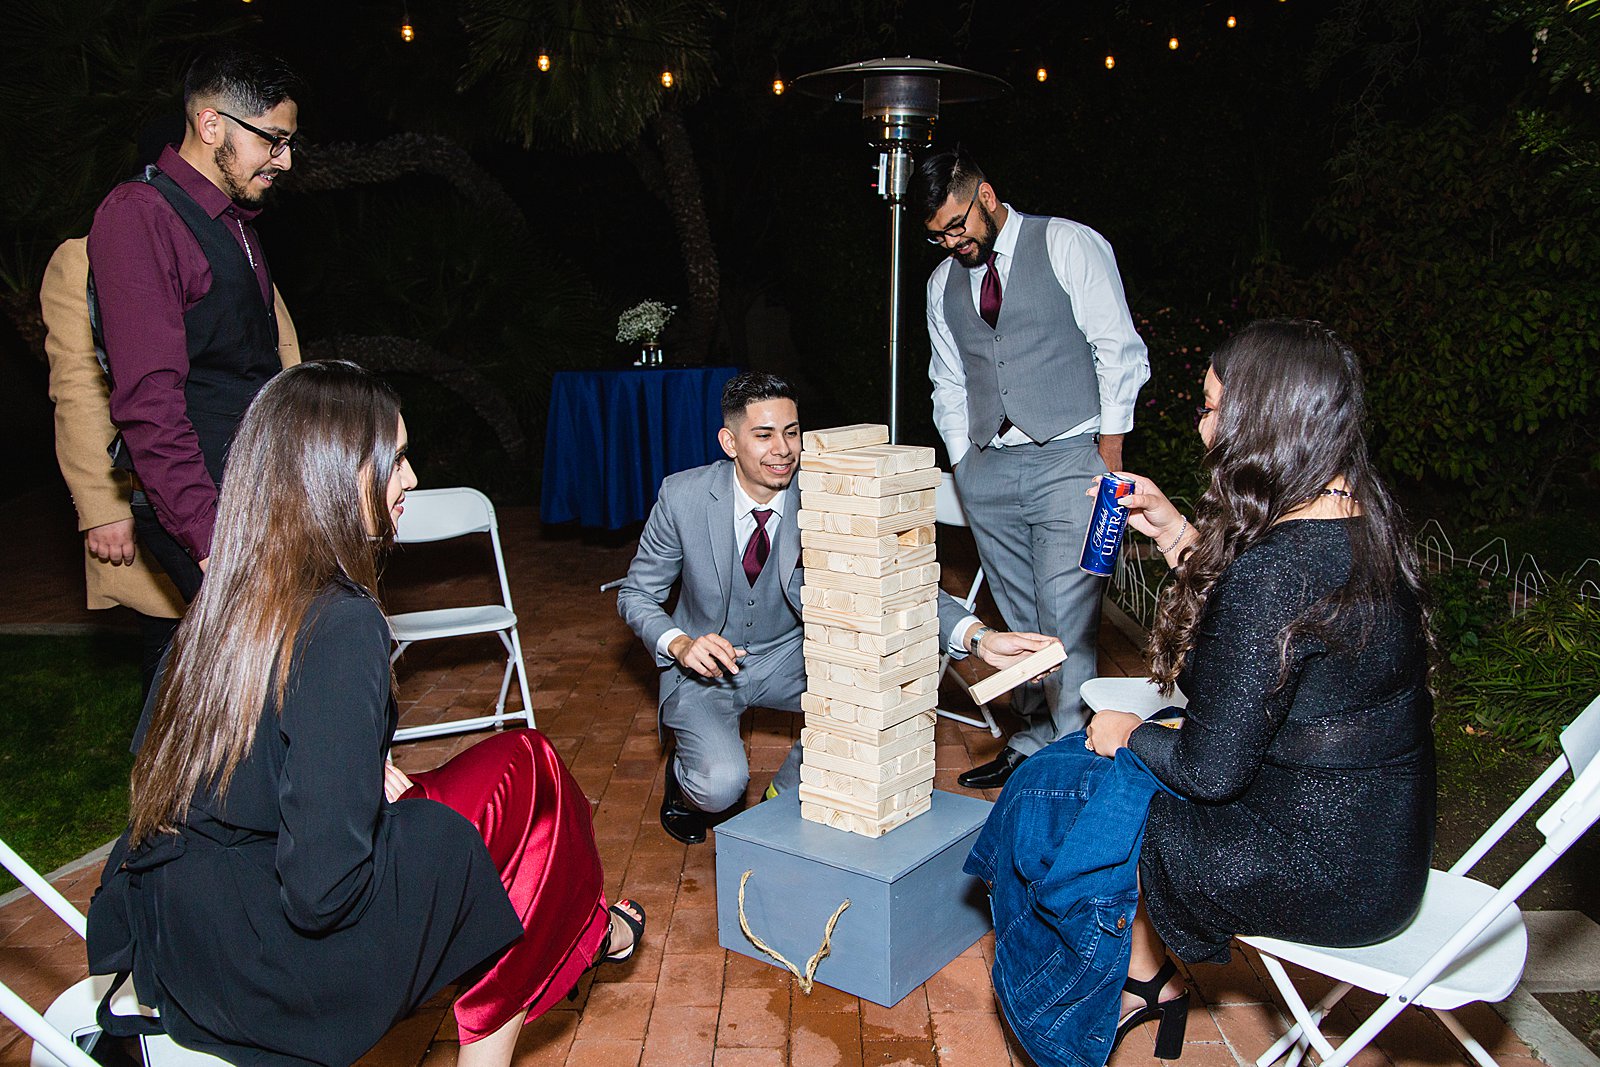 Guests playing jenga at Valley Garden Center wedding reception by PMA Photography.